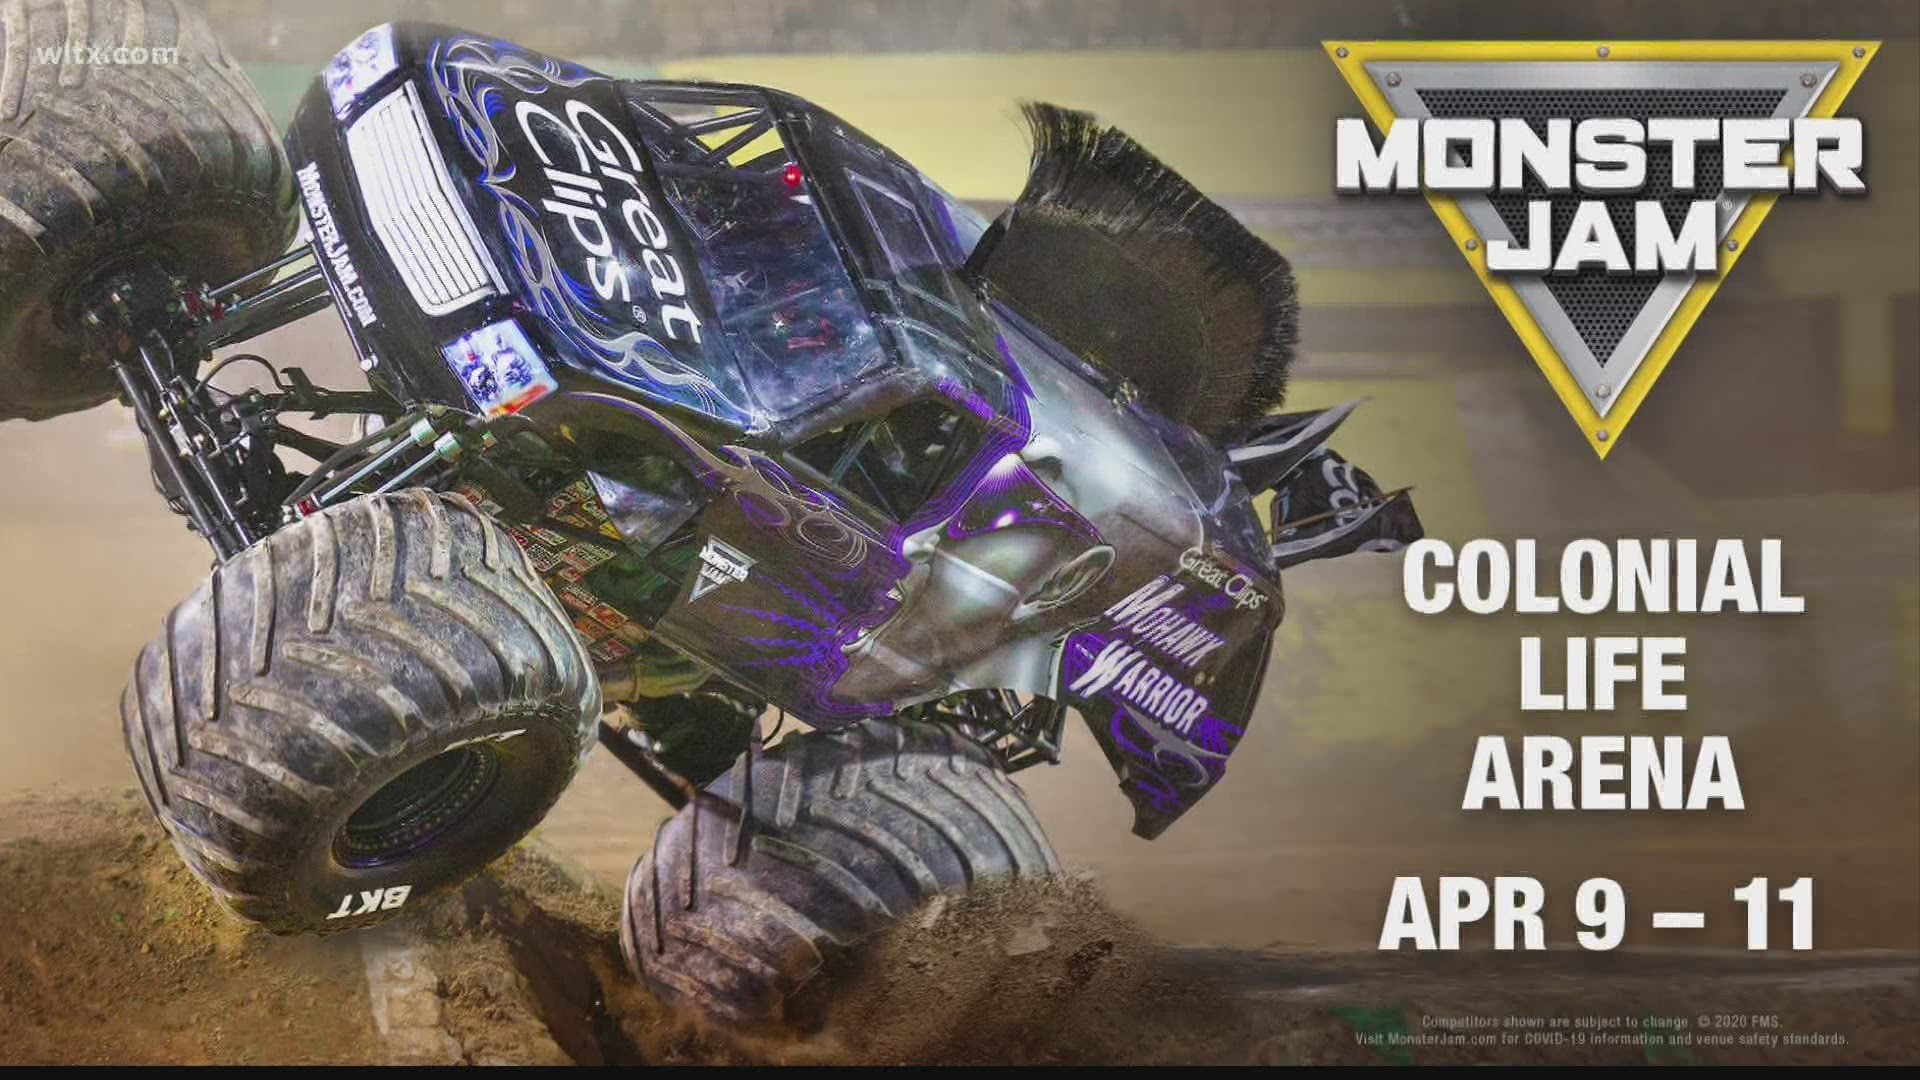 Monster Jam is returning to the Colonial Life Arena April 9-11, 2021, the first non-sporting event at the venue since the pandemic started.